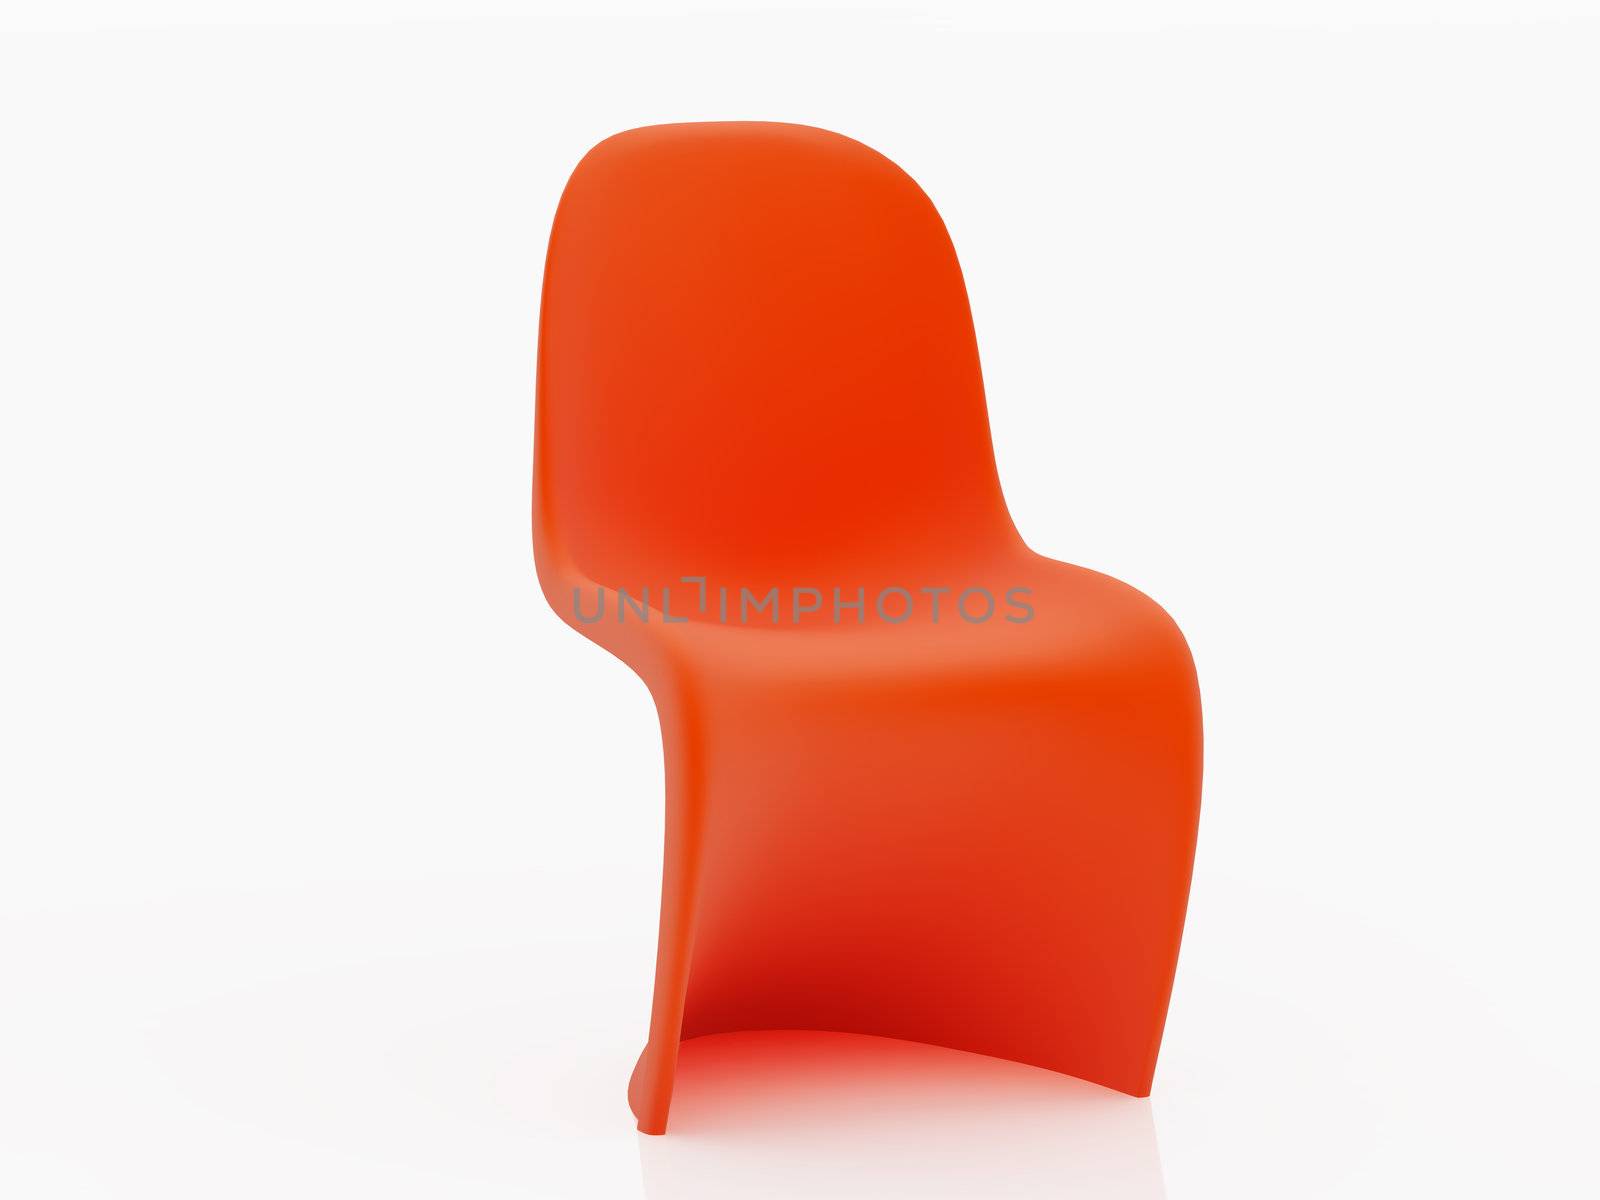 High resolution image  red armchair. 3d illustration over  white backgrounds.